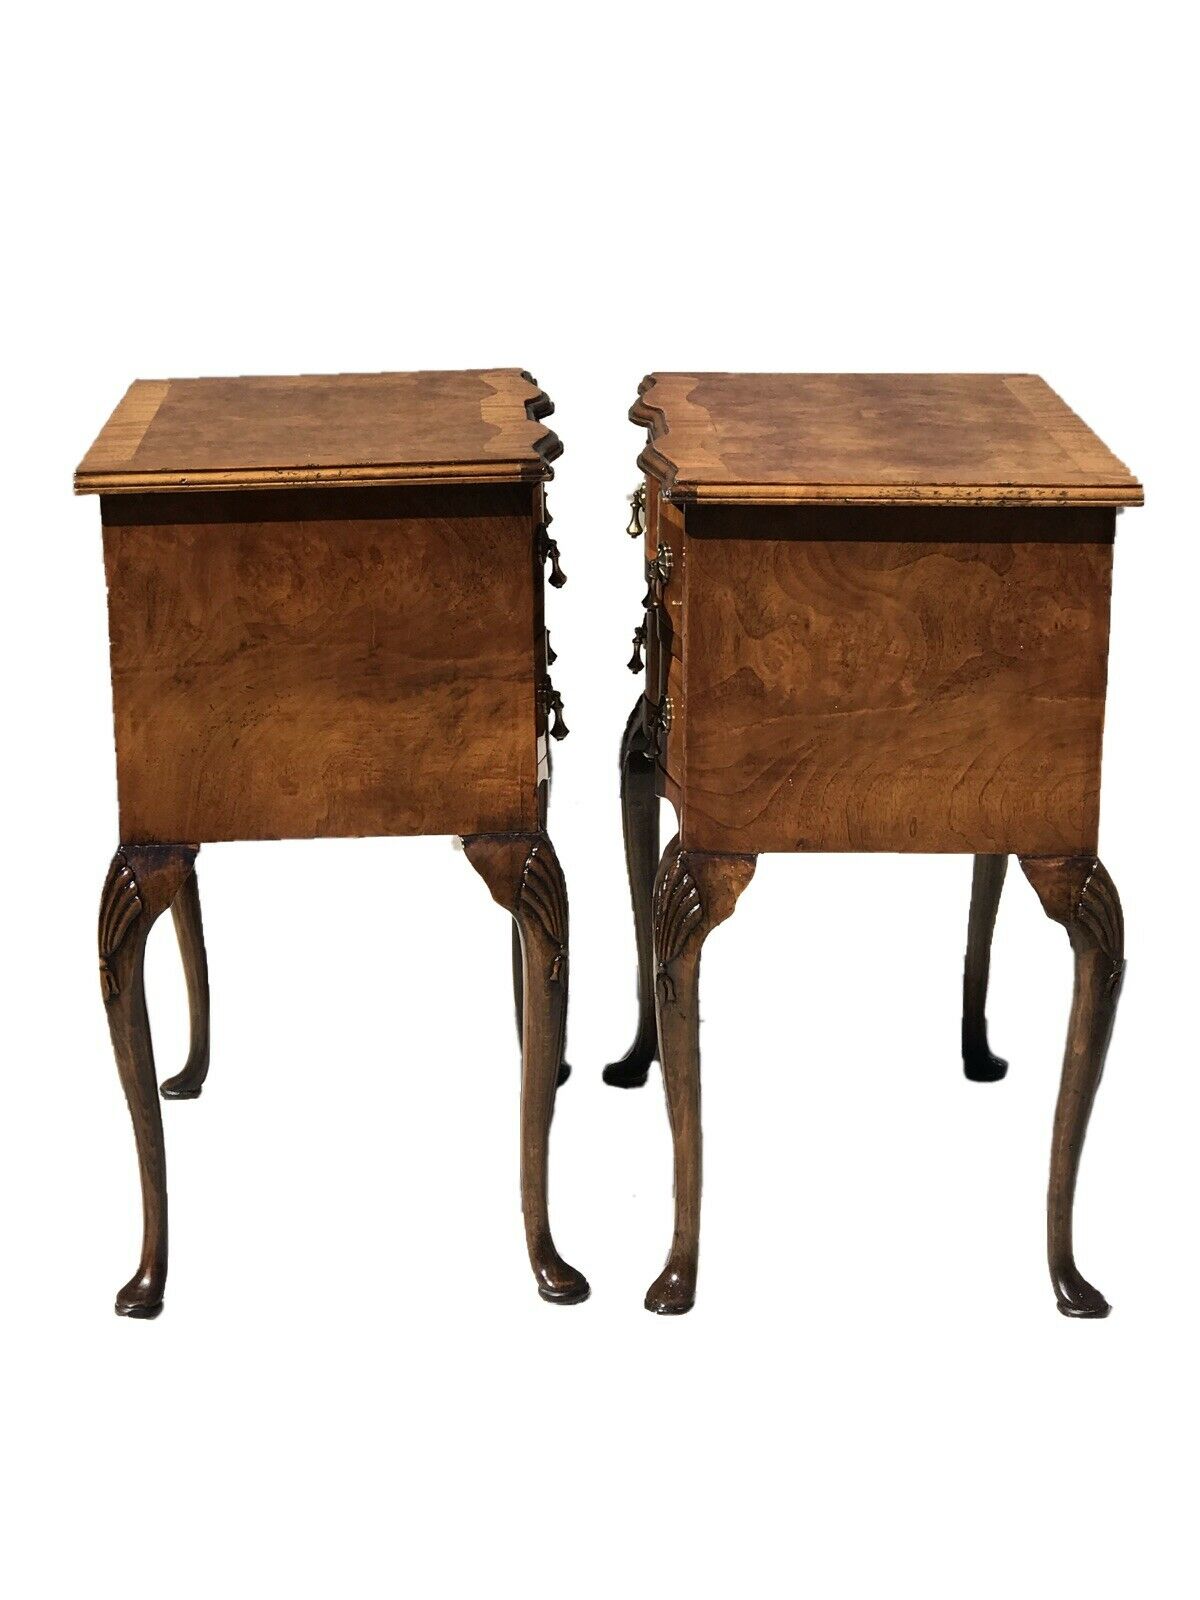 EARLY 20TH C GEORGIAN ANTIQUE STYLE INLAID PARQUETRY NIGHT STANDS